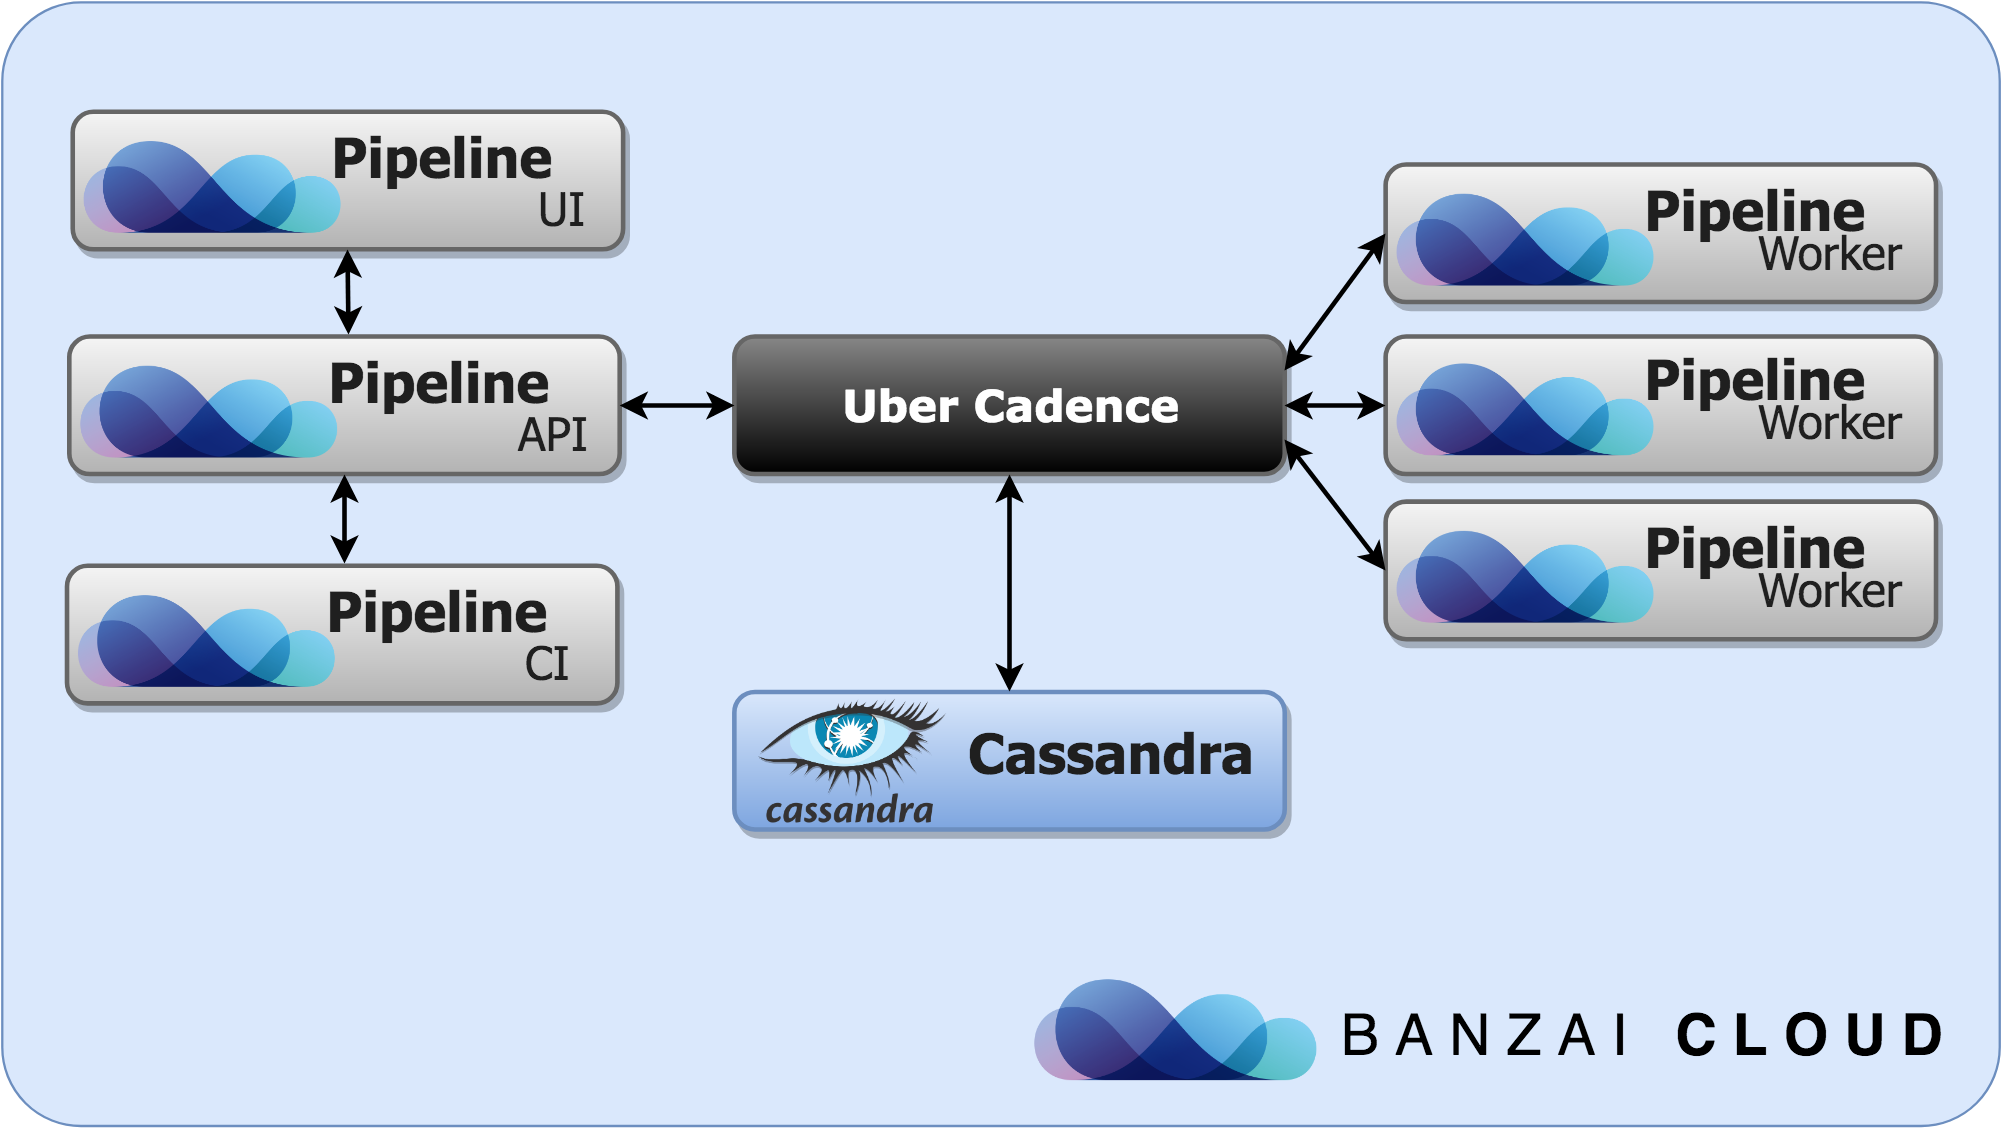 Cadence used by the Banzai Cloud Pipeline Platform